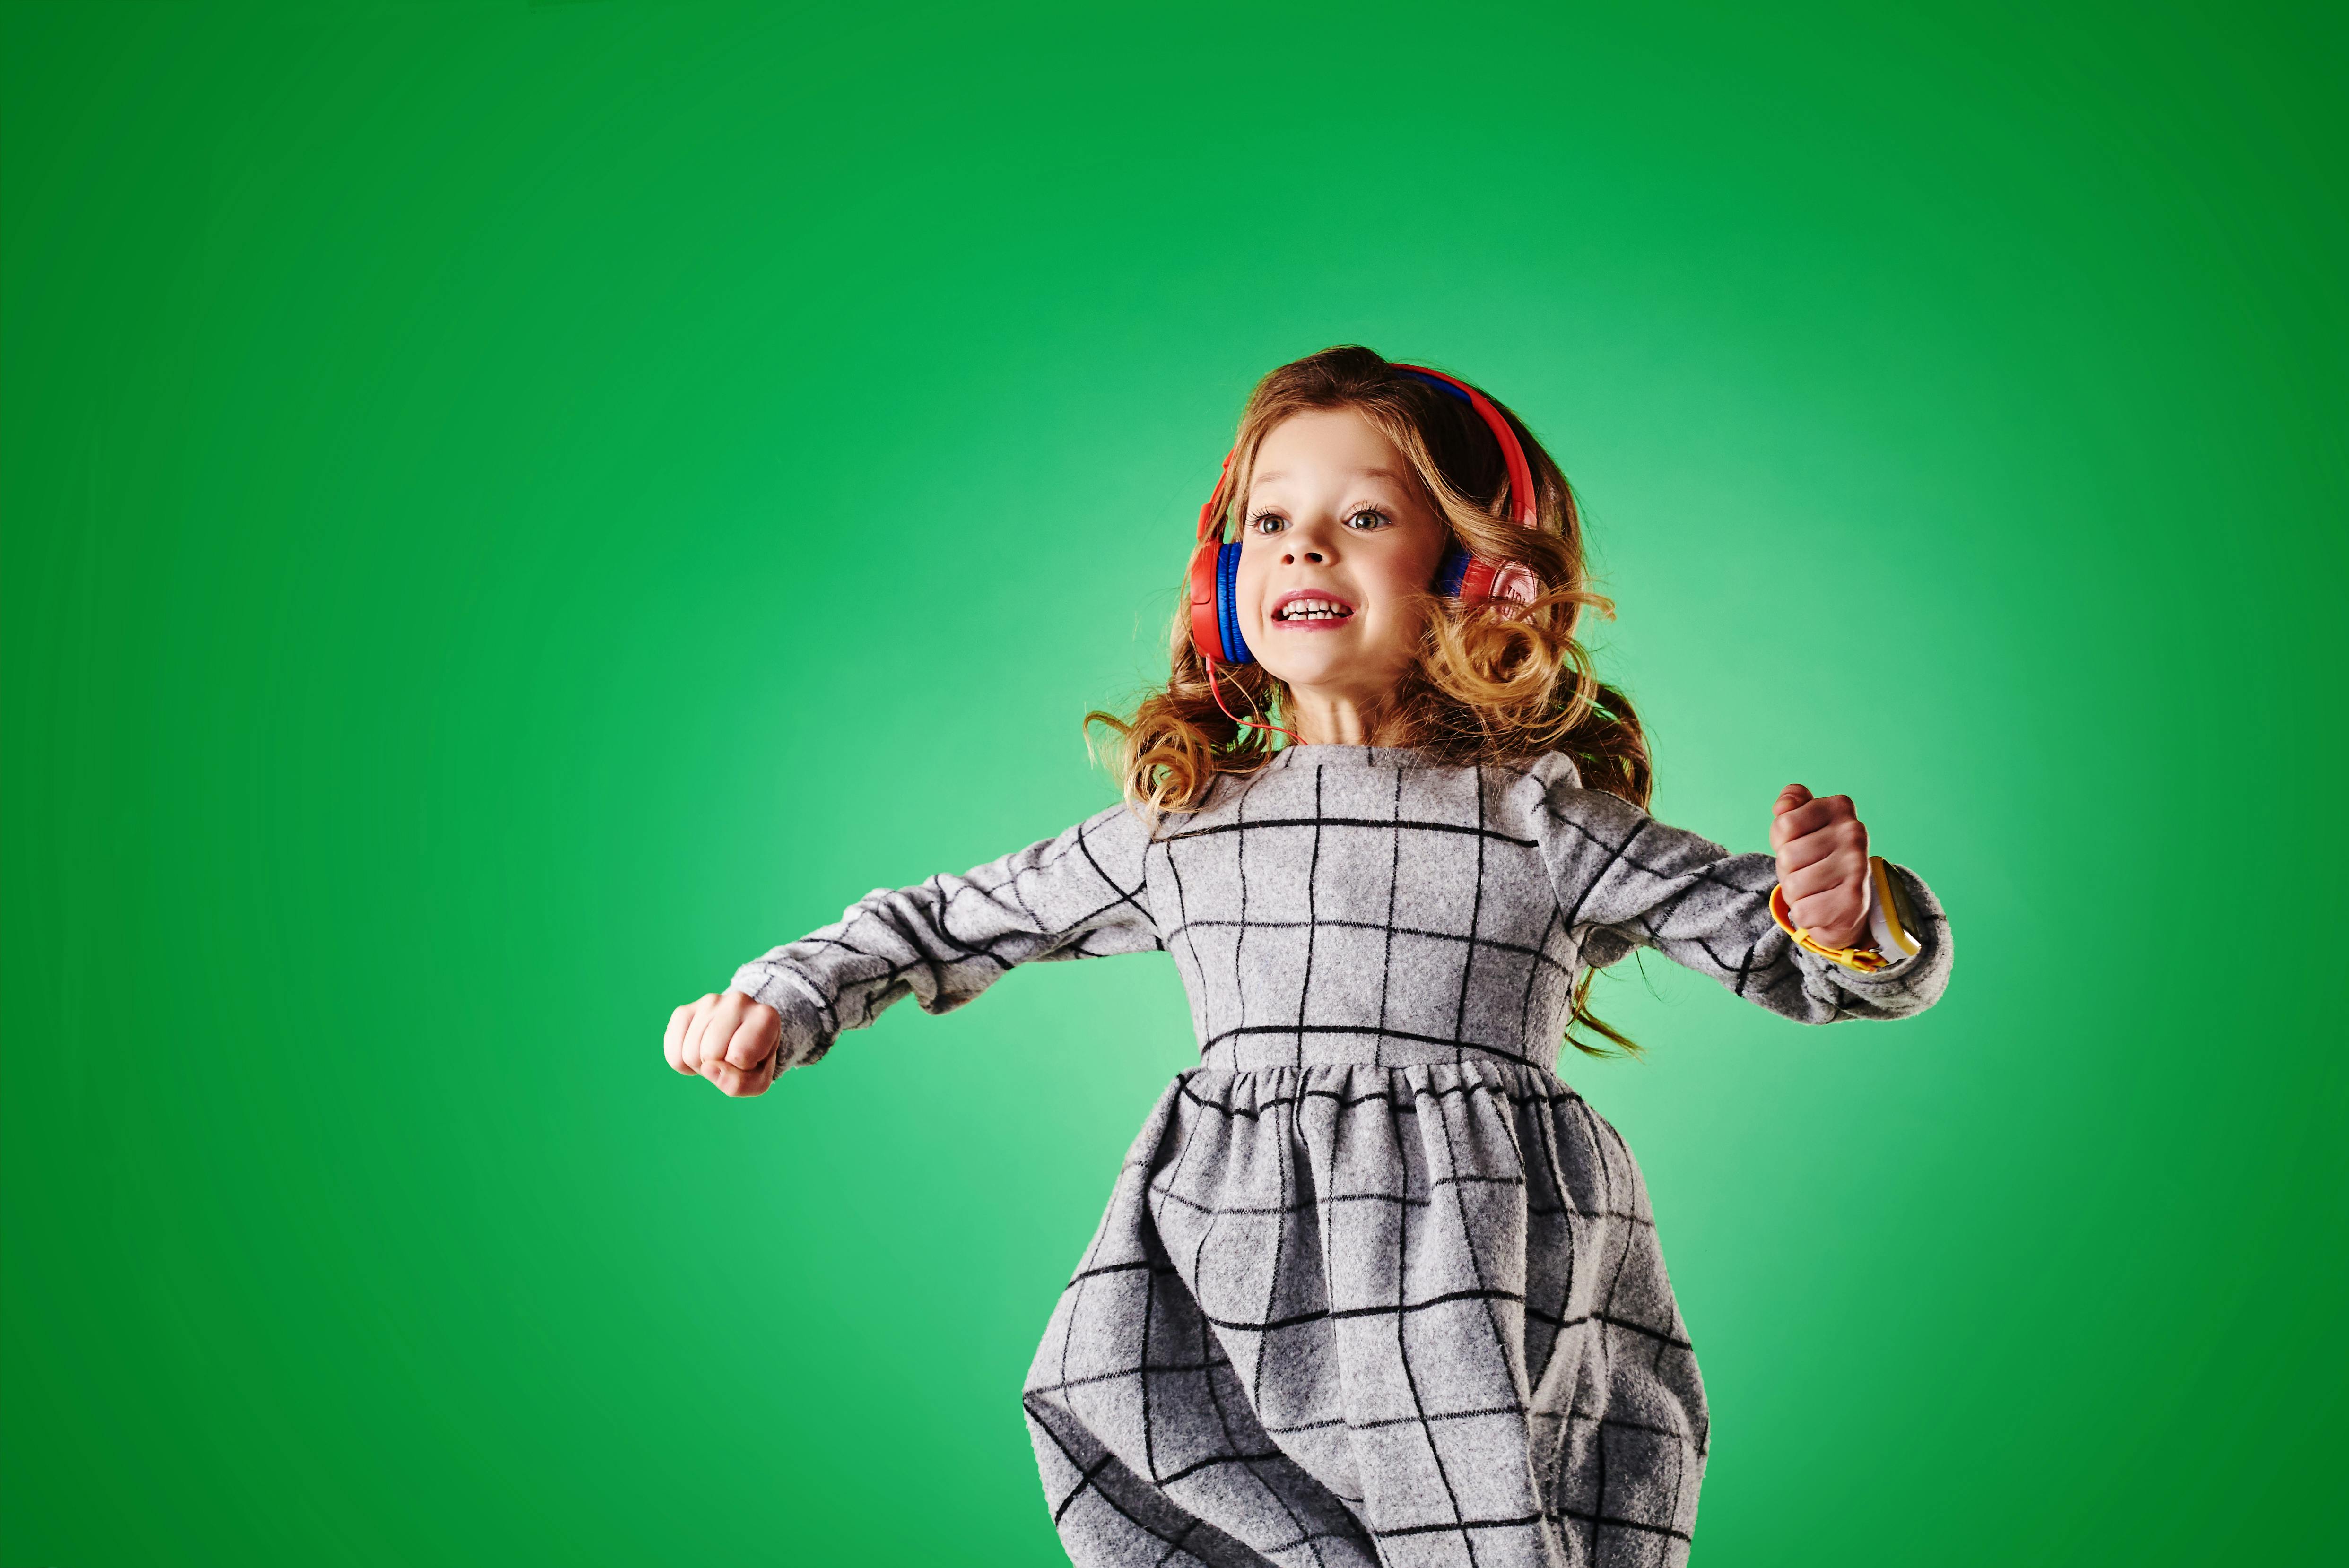 little wearing headphones jumping in front of a green screen